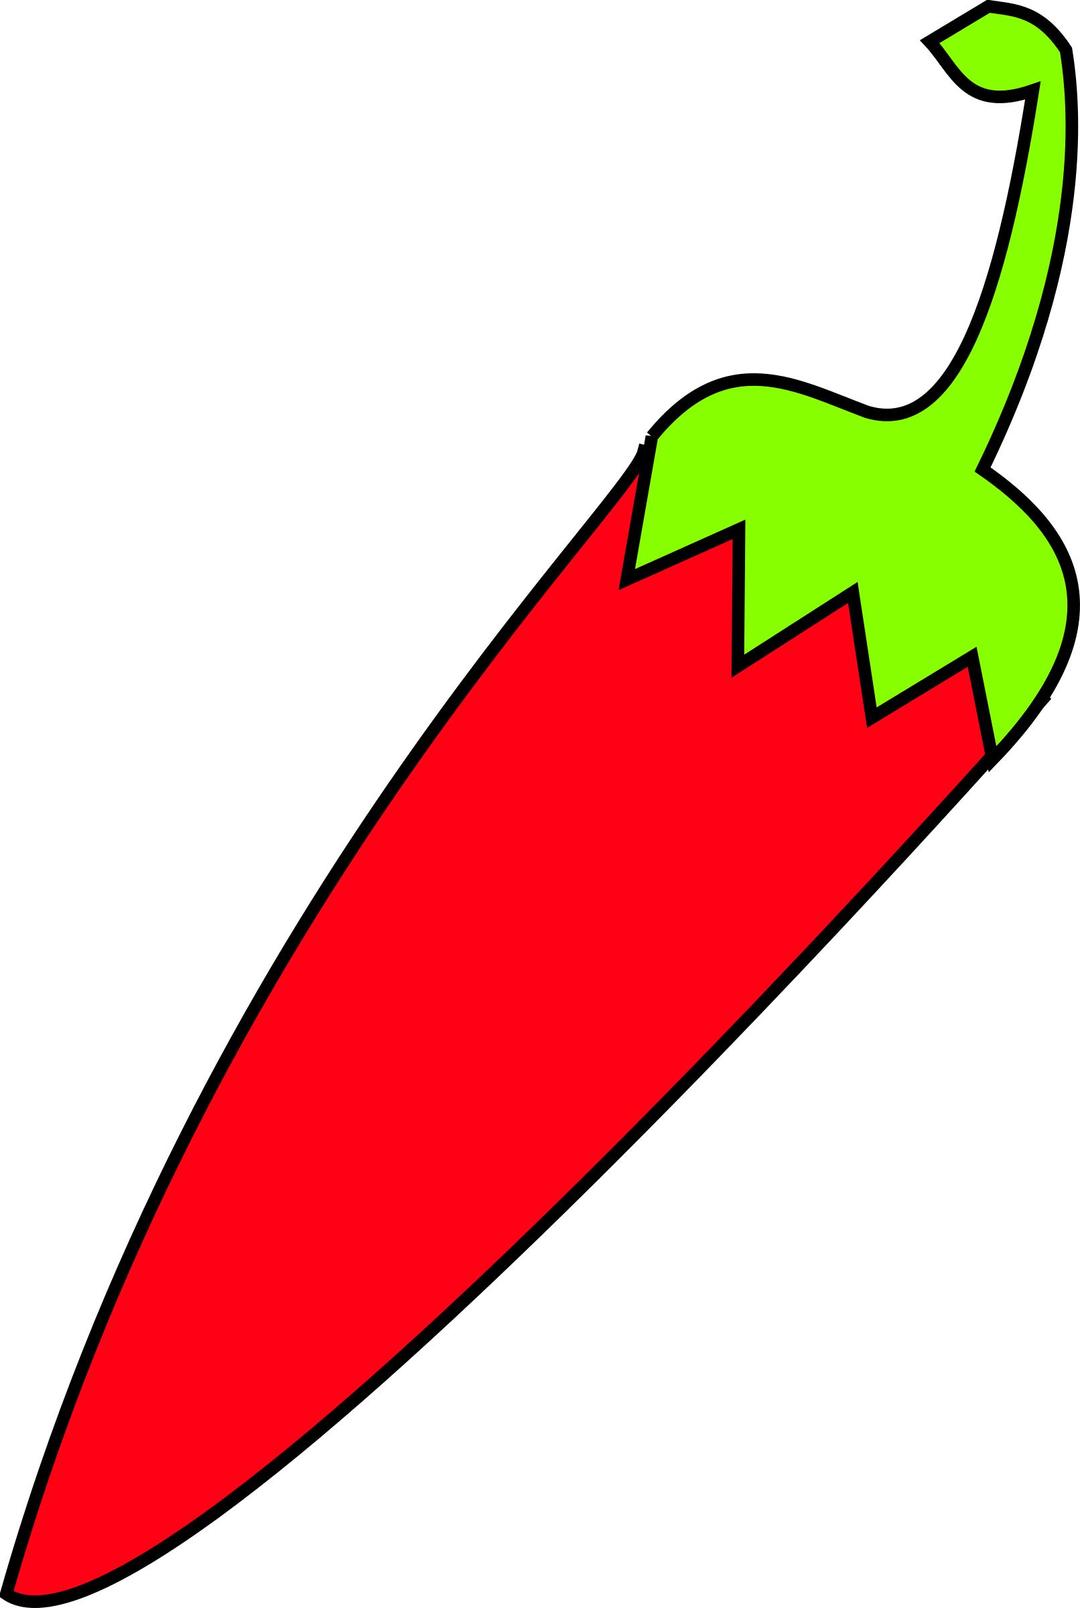 red chili with green tail png transparent